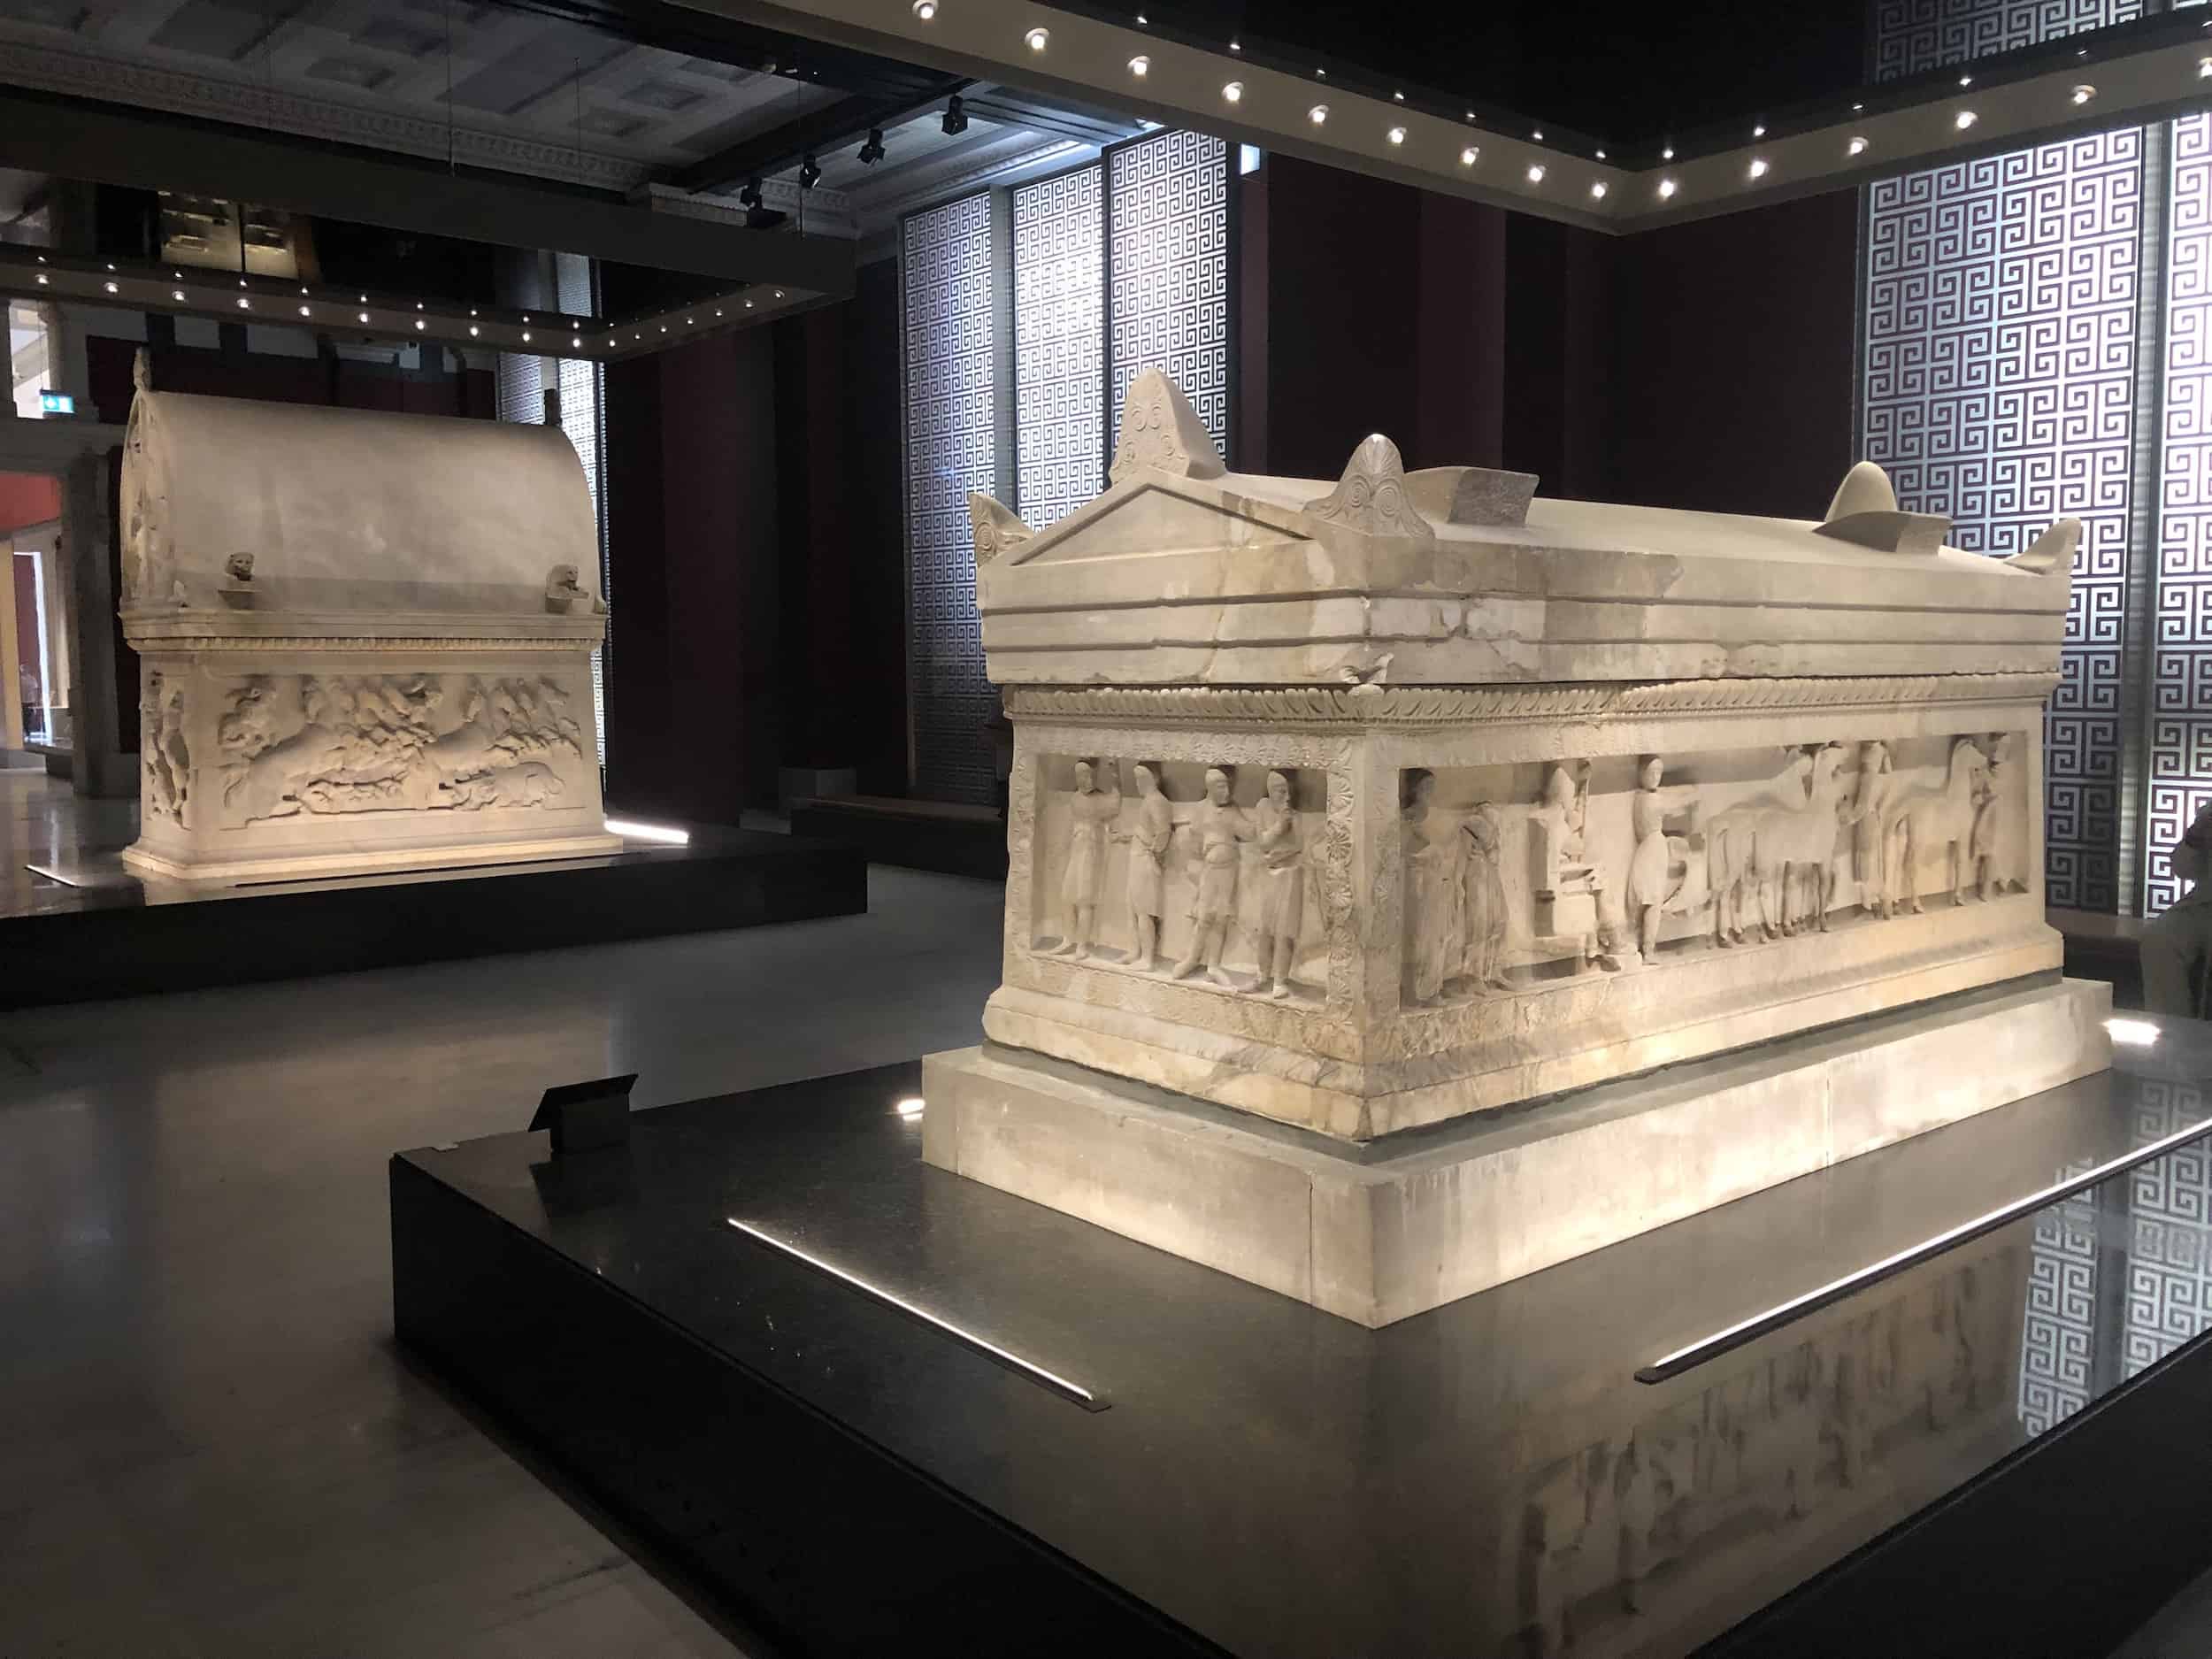 Sarcophagi at the Istanbul Archaeology Museum in Istanbul, Turkey